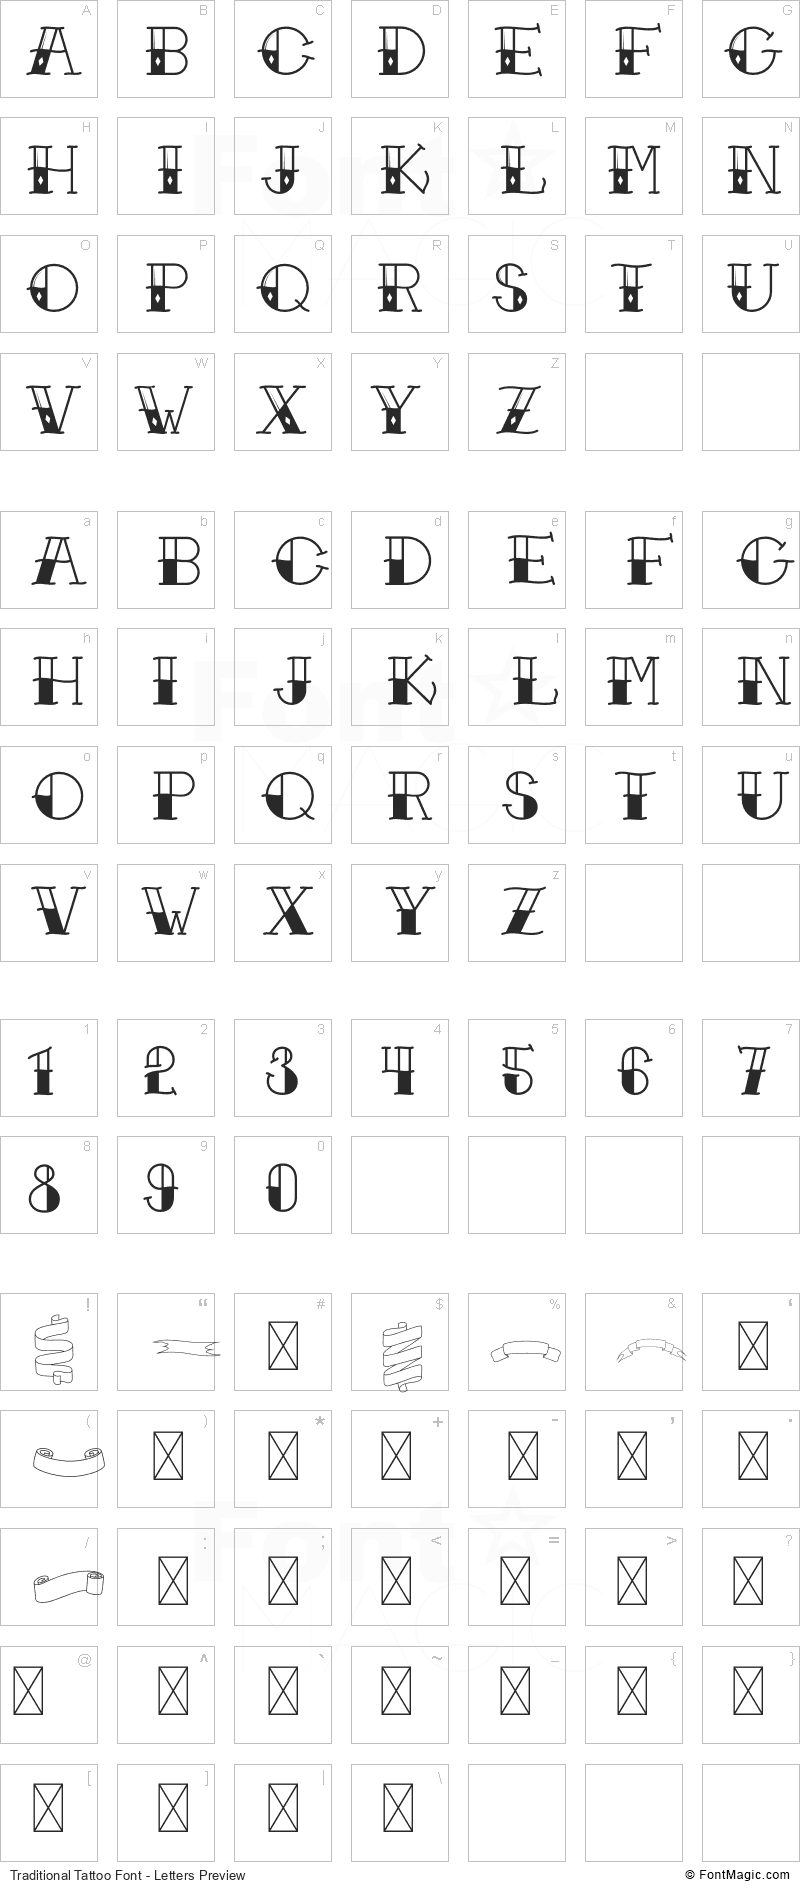 Traditional Tattoo Font - All Latters Preview Chart